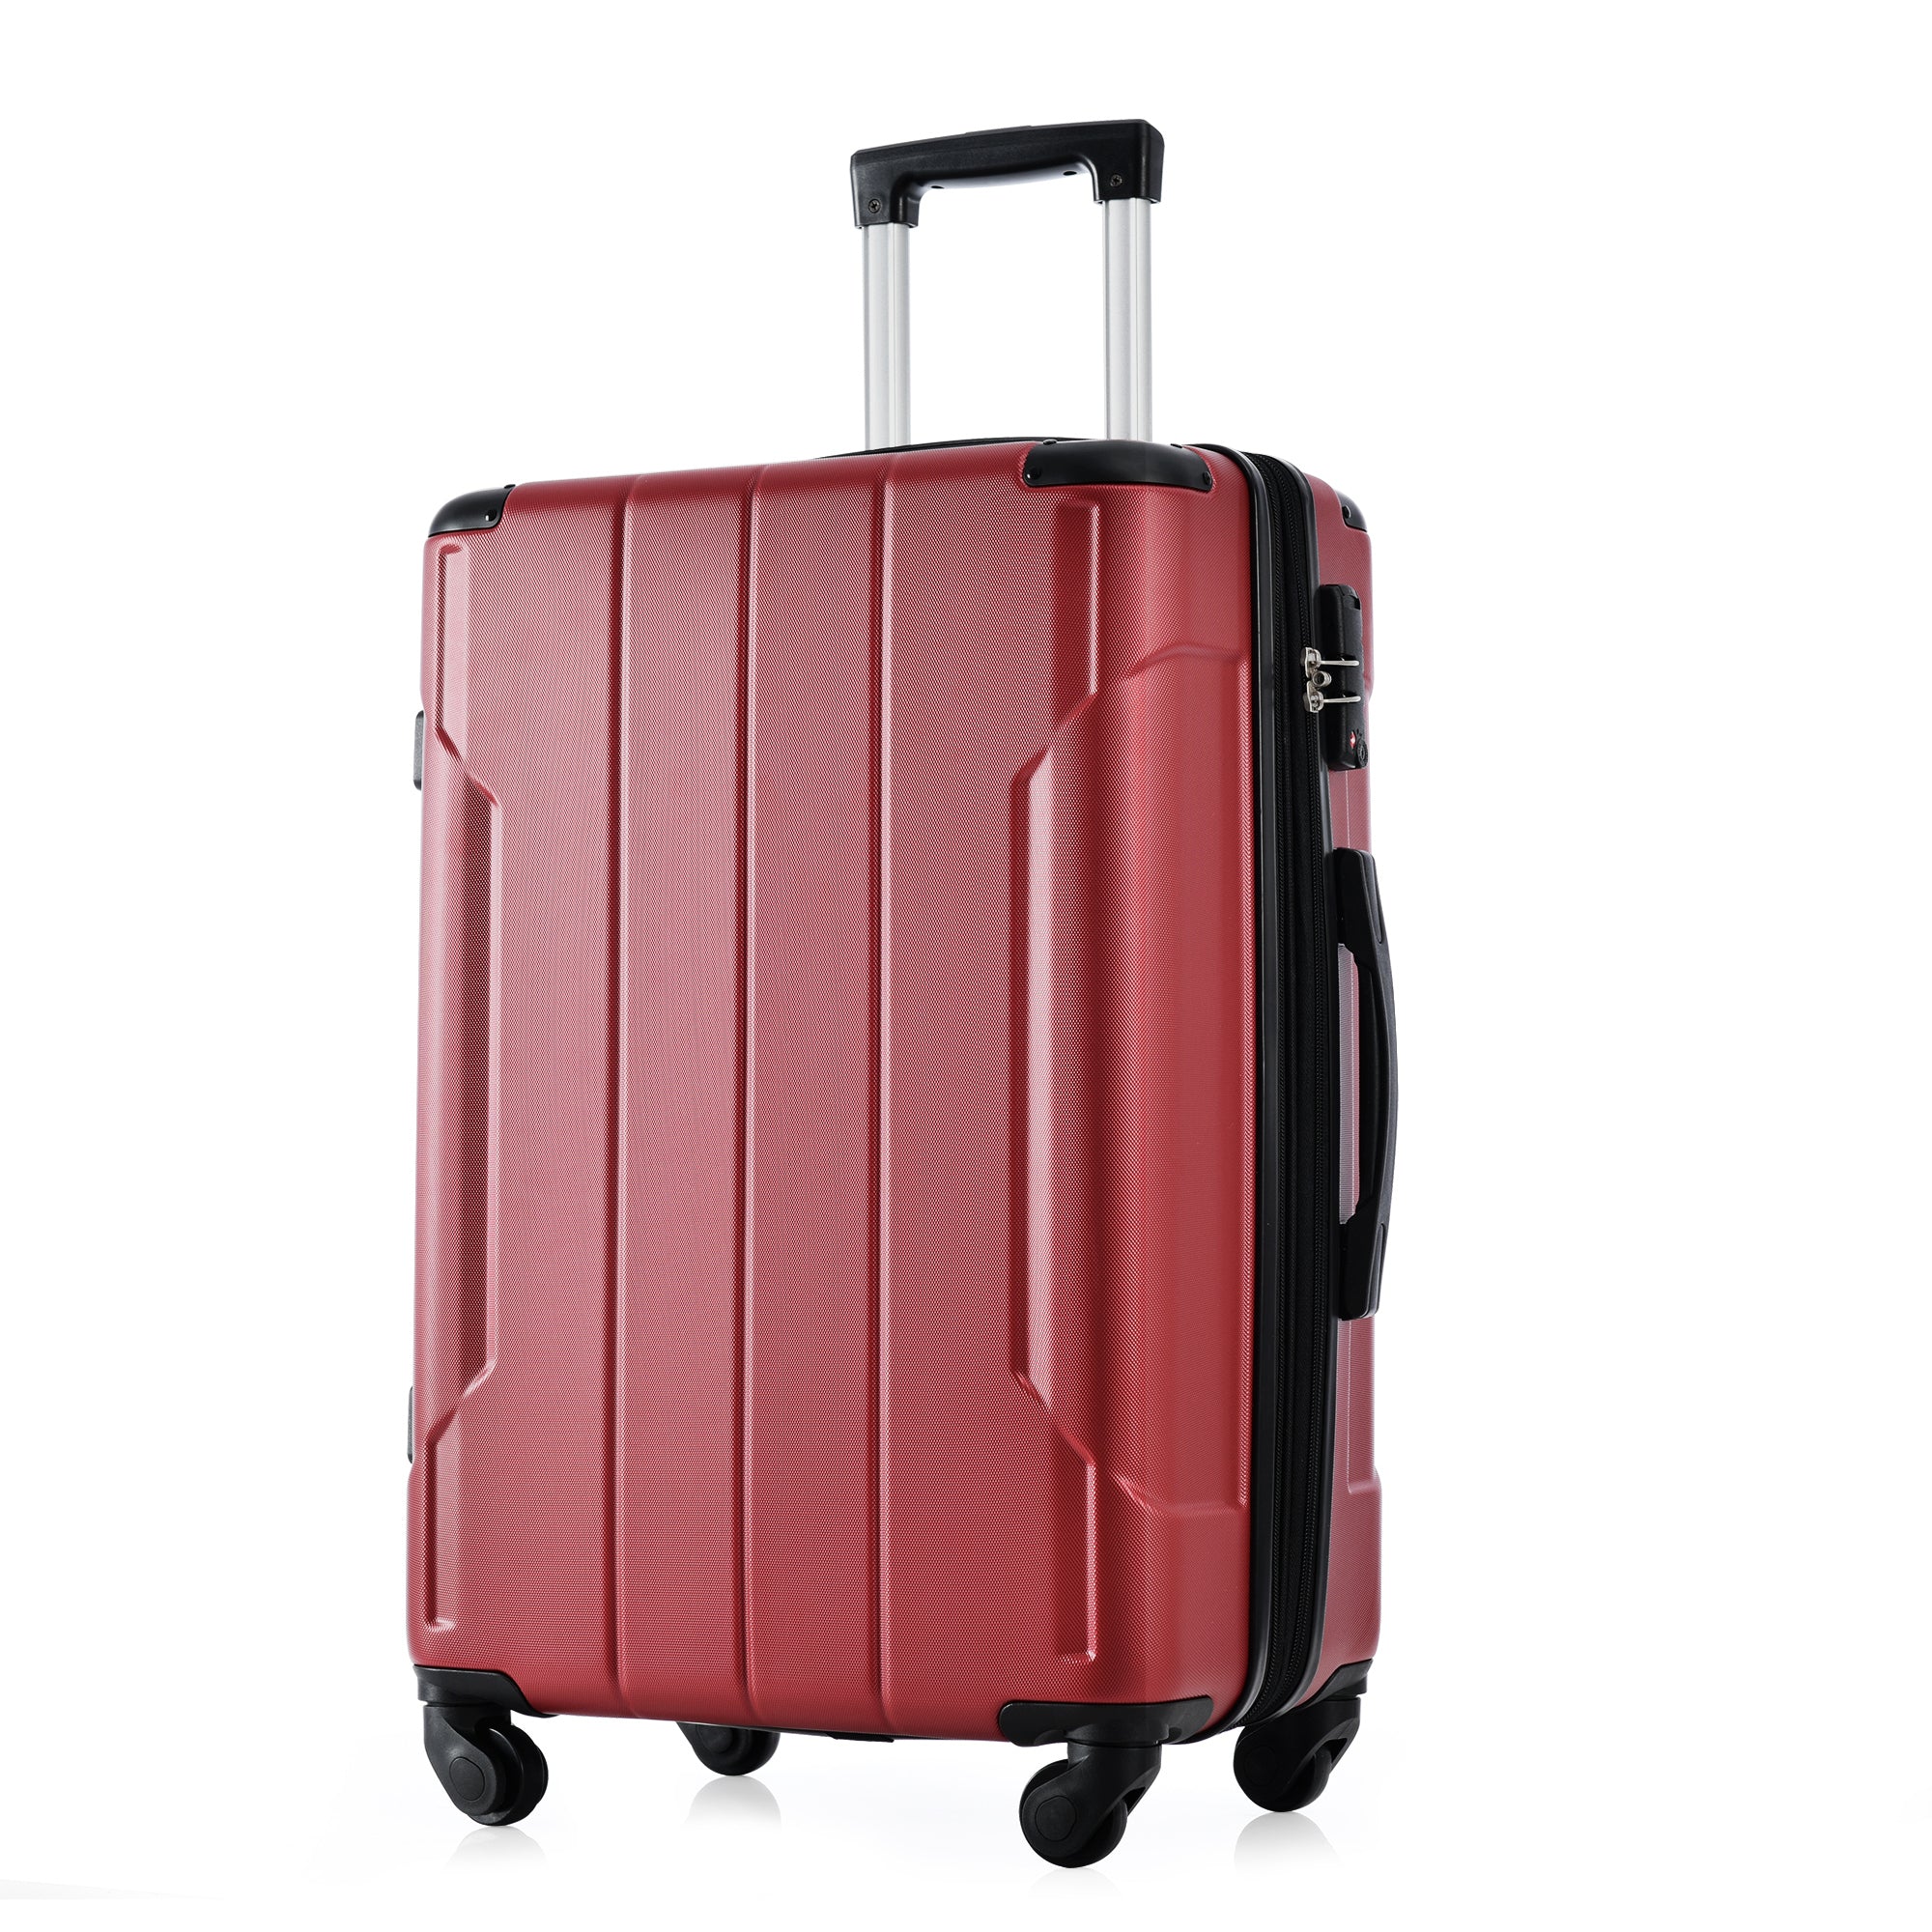 Hardside Luggage Sets 2 Piece Suitcase Set Expandable red-abs